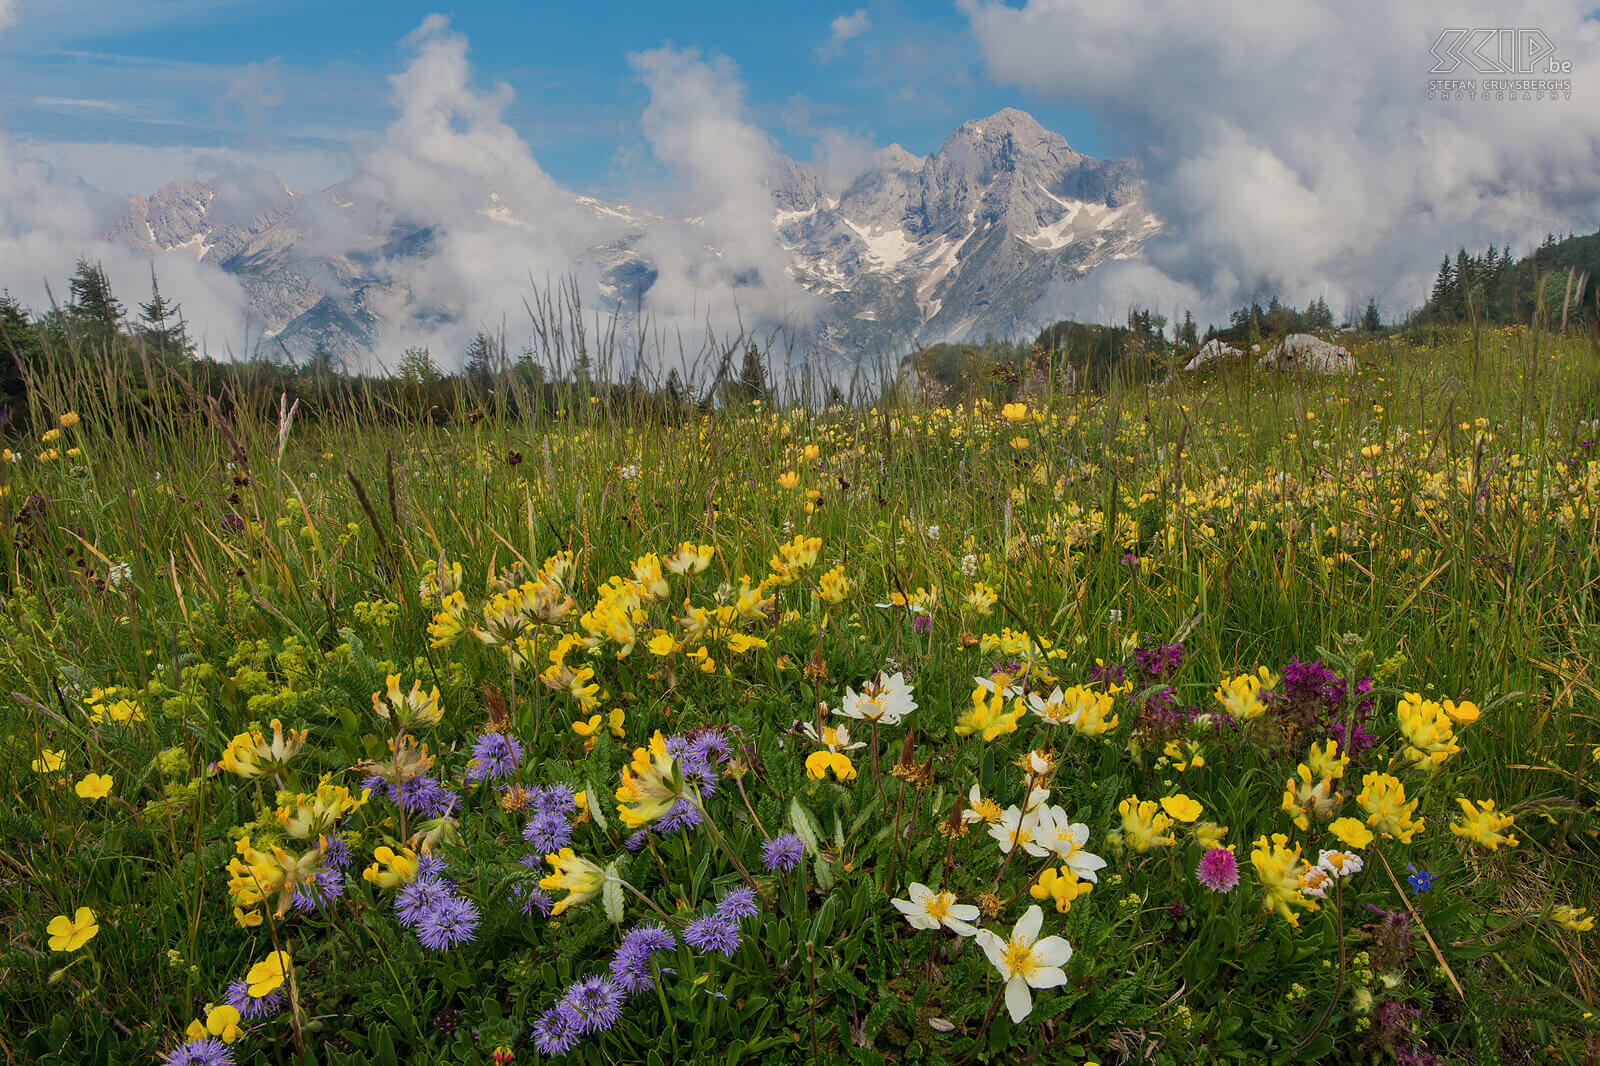 Velika Planina - Flowering alpine meadow A flowering alpine meadow at an altitude of 1600m on the Velika Planina plateau near Kamnik. This photo is a stack of 6 images. Stefan Cruysberghs